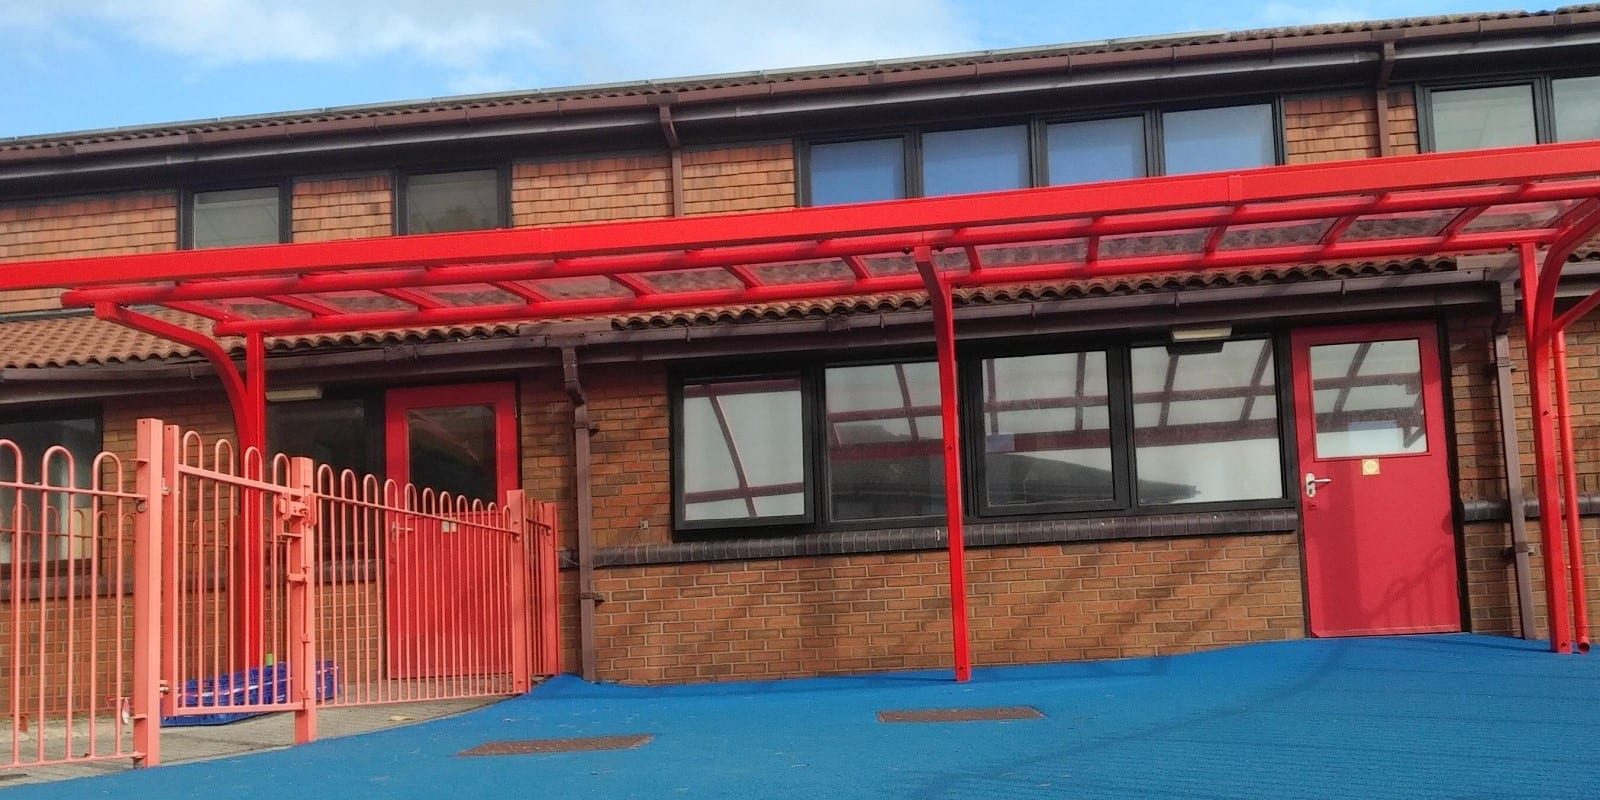 Canopy we designed for Milking Bank Primary School